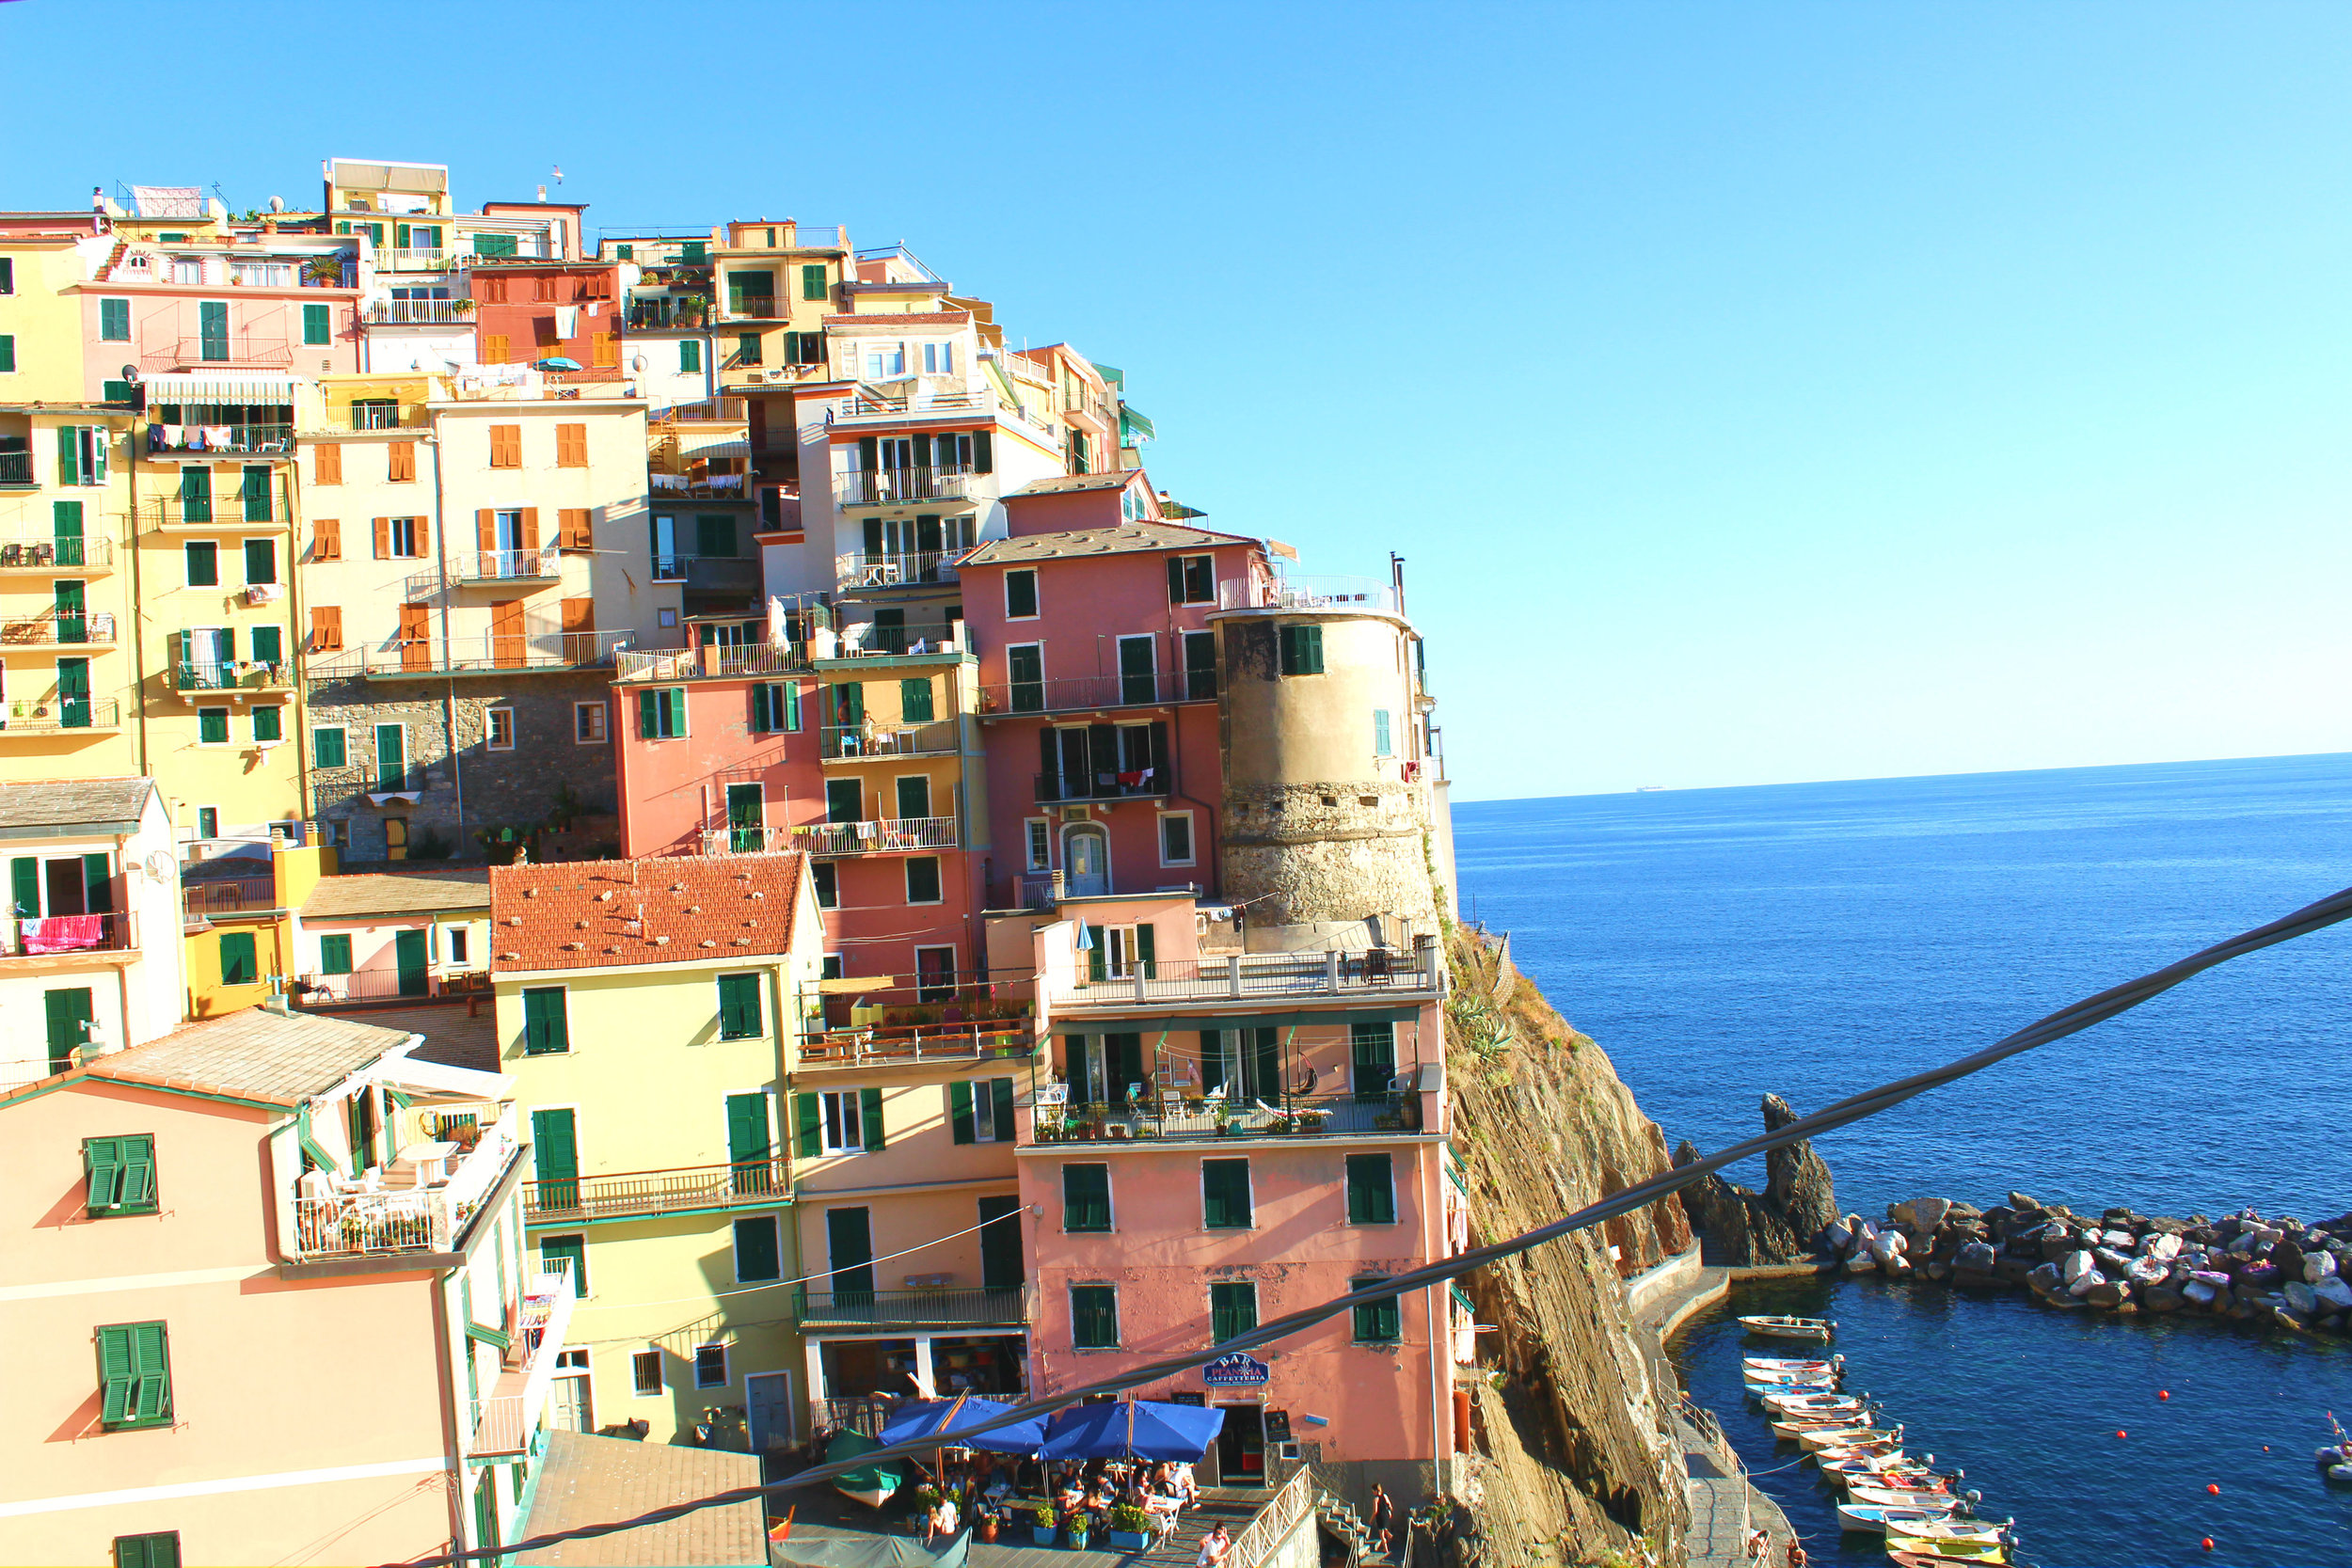 The Cinque Terre, Rural Italy, and Pisa